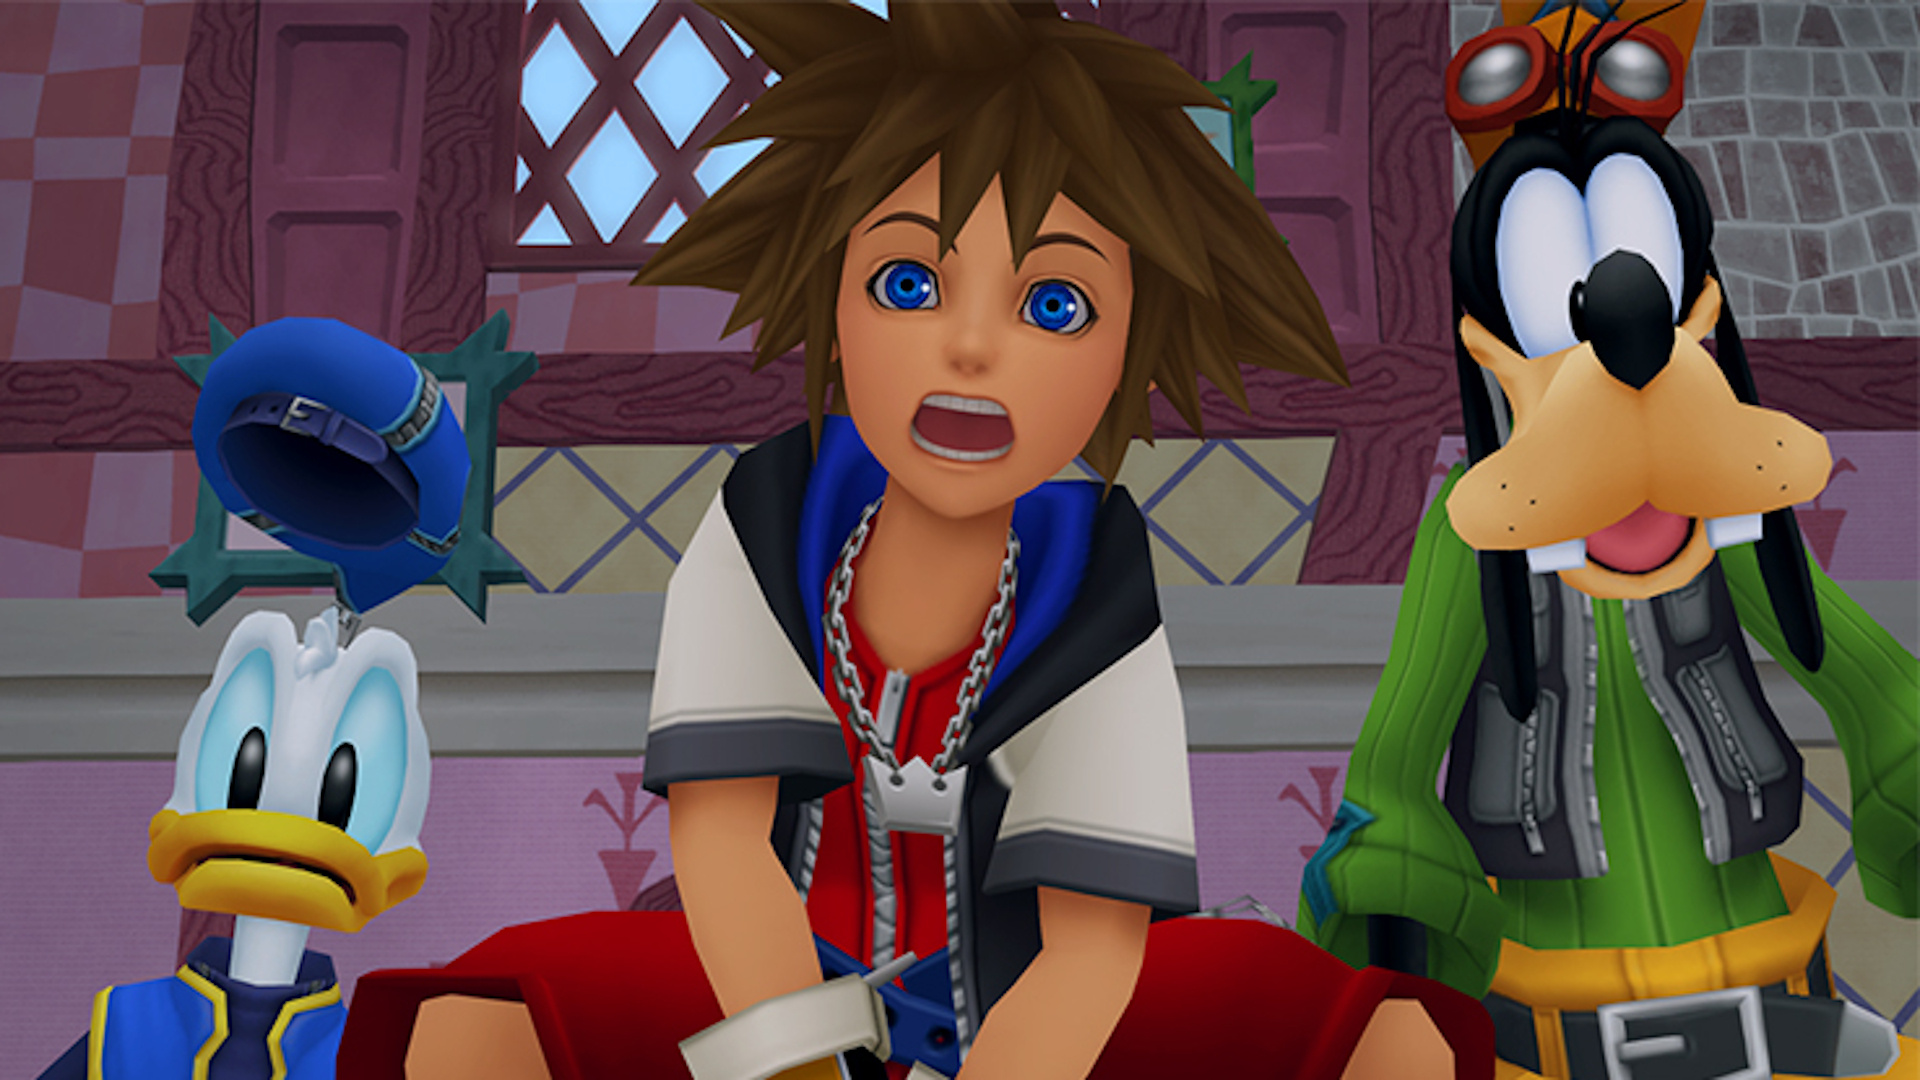 Kingdom Hearts PC save files, PNG images, 1920x1080 Full HD Desktop